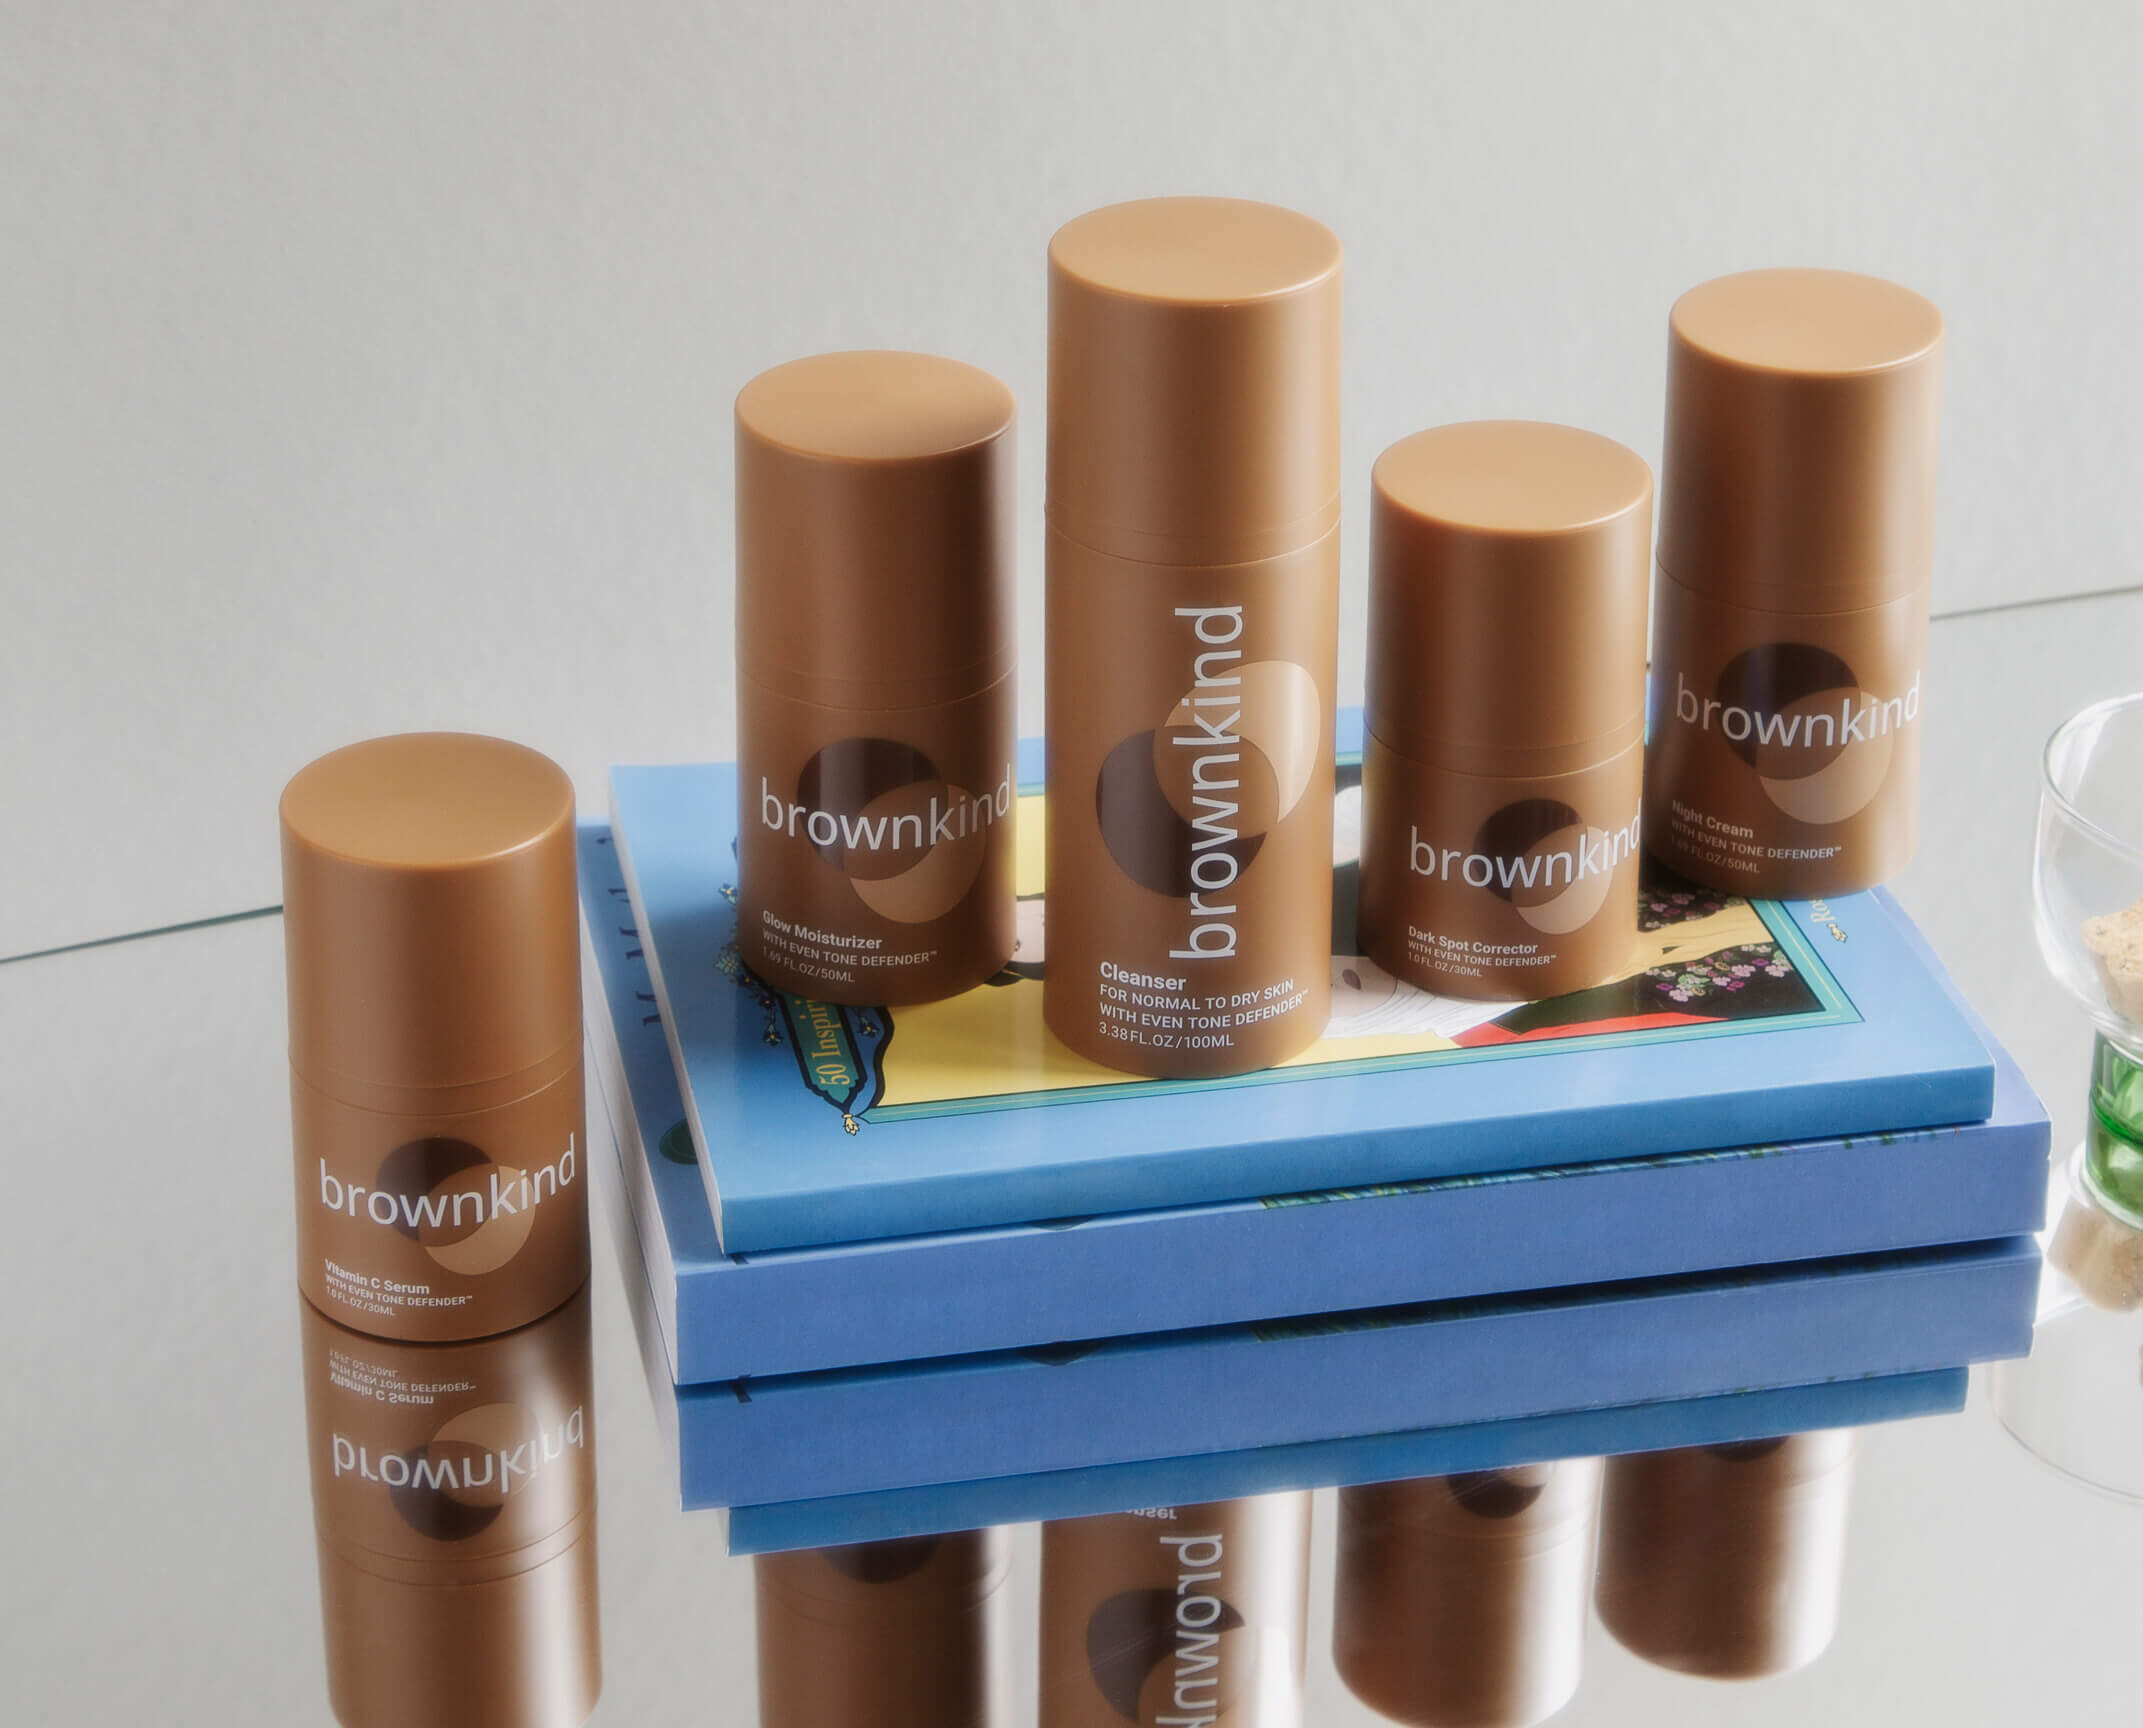 Image of brownkind bottles on a stack of books